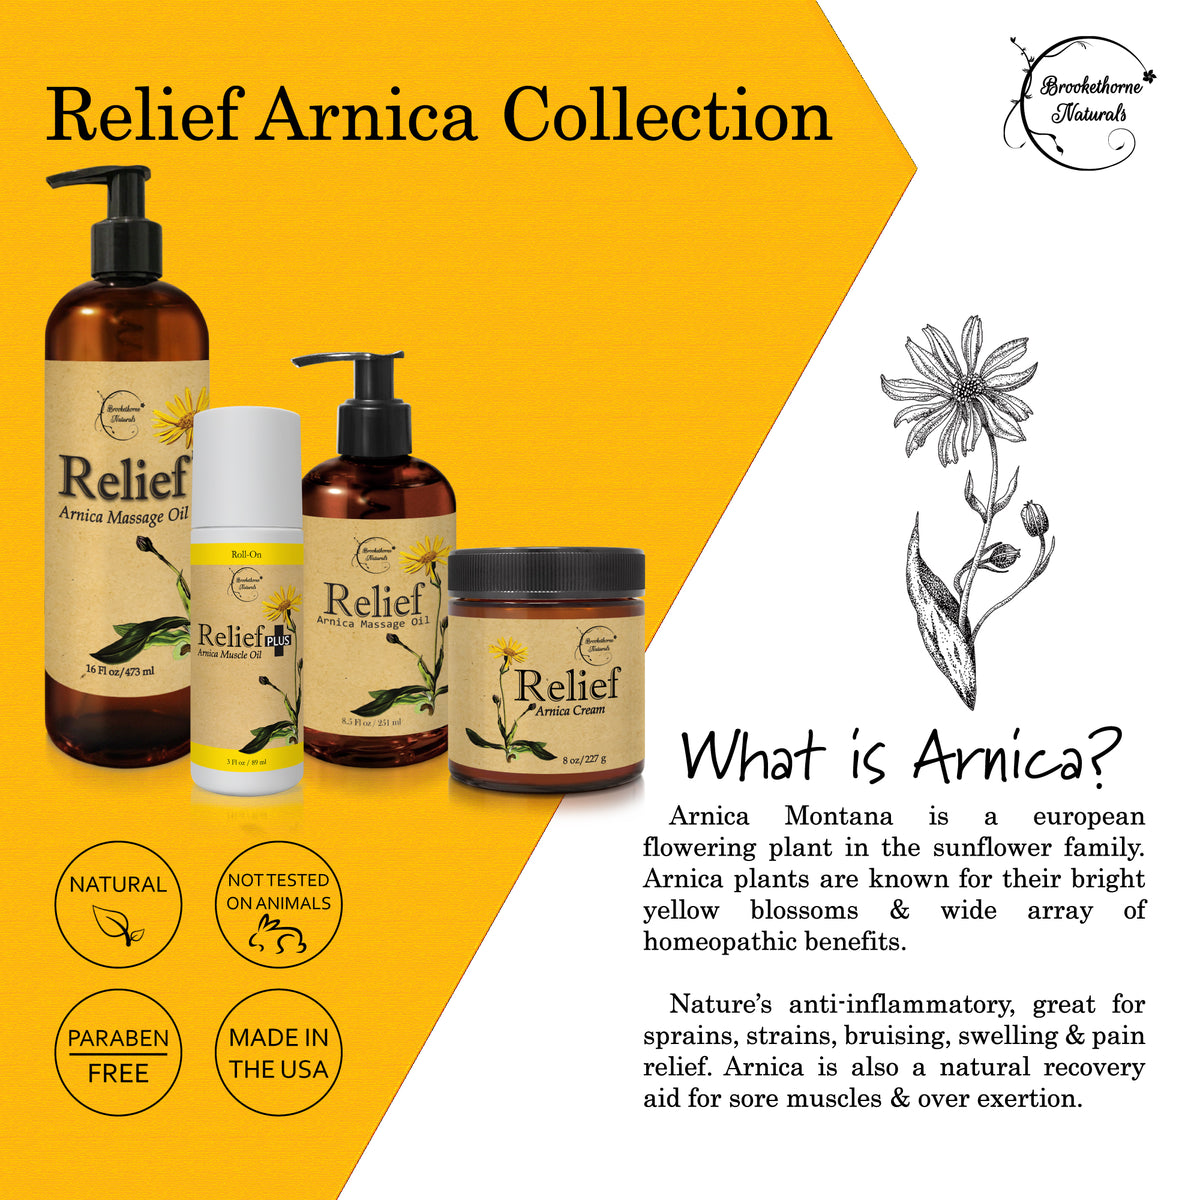 Relief Arnica Collection Infographic